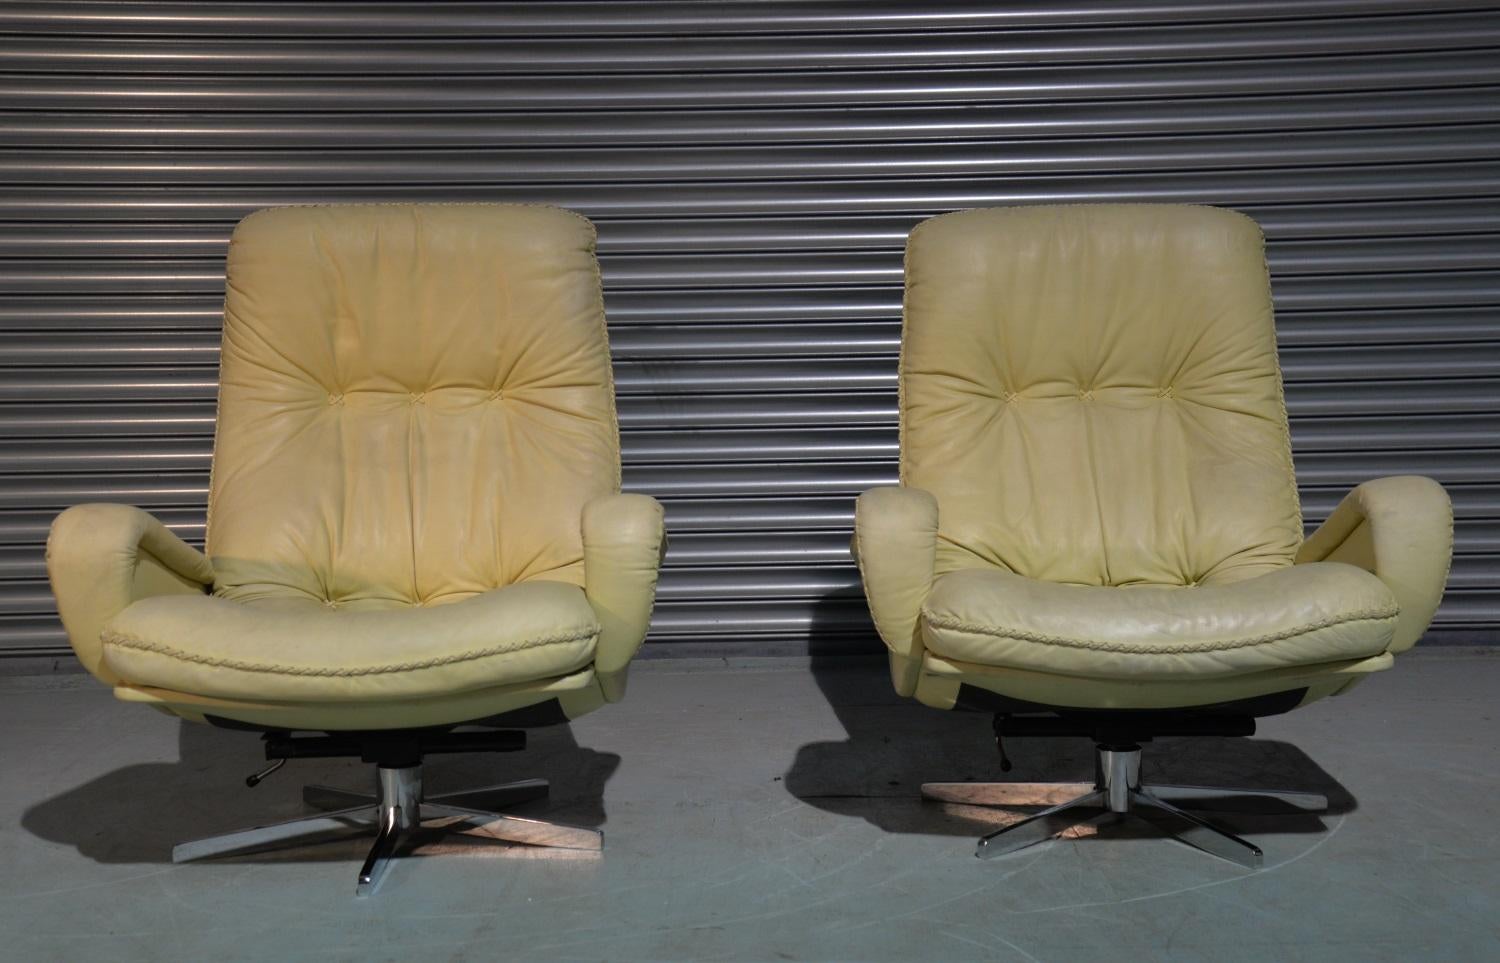 Discounted airfreight for our US and International customers ( from 2 weeks door to door)

An ultra rare and highly desirable pair of De Sede S 231 vintage lounge swivel club armchairs. Built in the late 1960s by De Sede craftsman from Switzerland